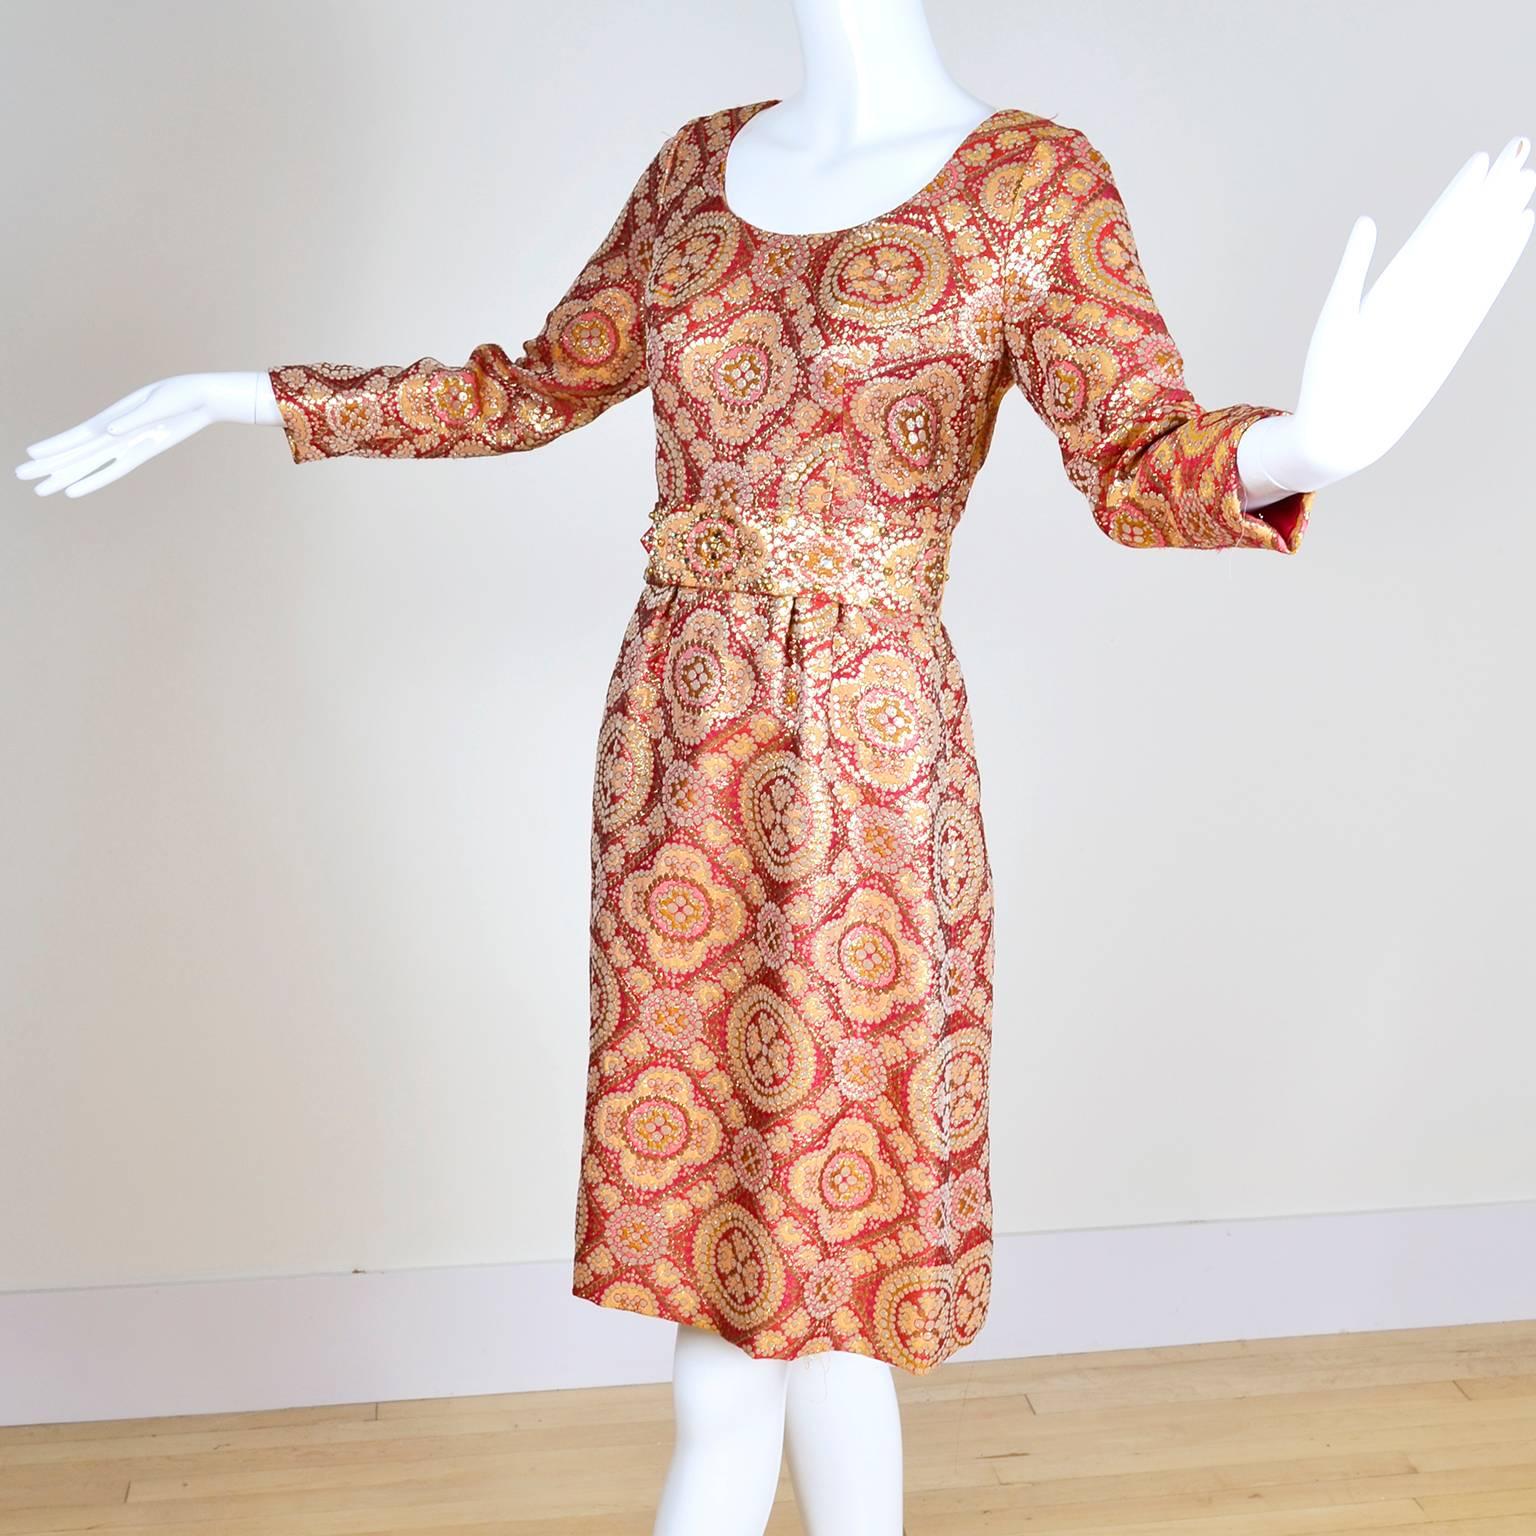 This vintage dress was designed by Adele Simpson in the 1960's. This dress would make a perfect cocktail dress and is made in a metallic brocade fabric with deep orange, copper, gold and yellow tones and comes with its original fabric belt, which is